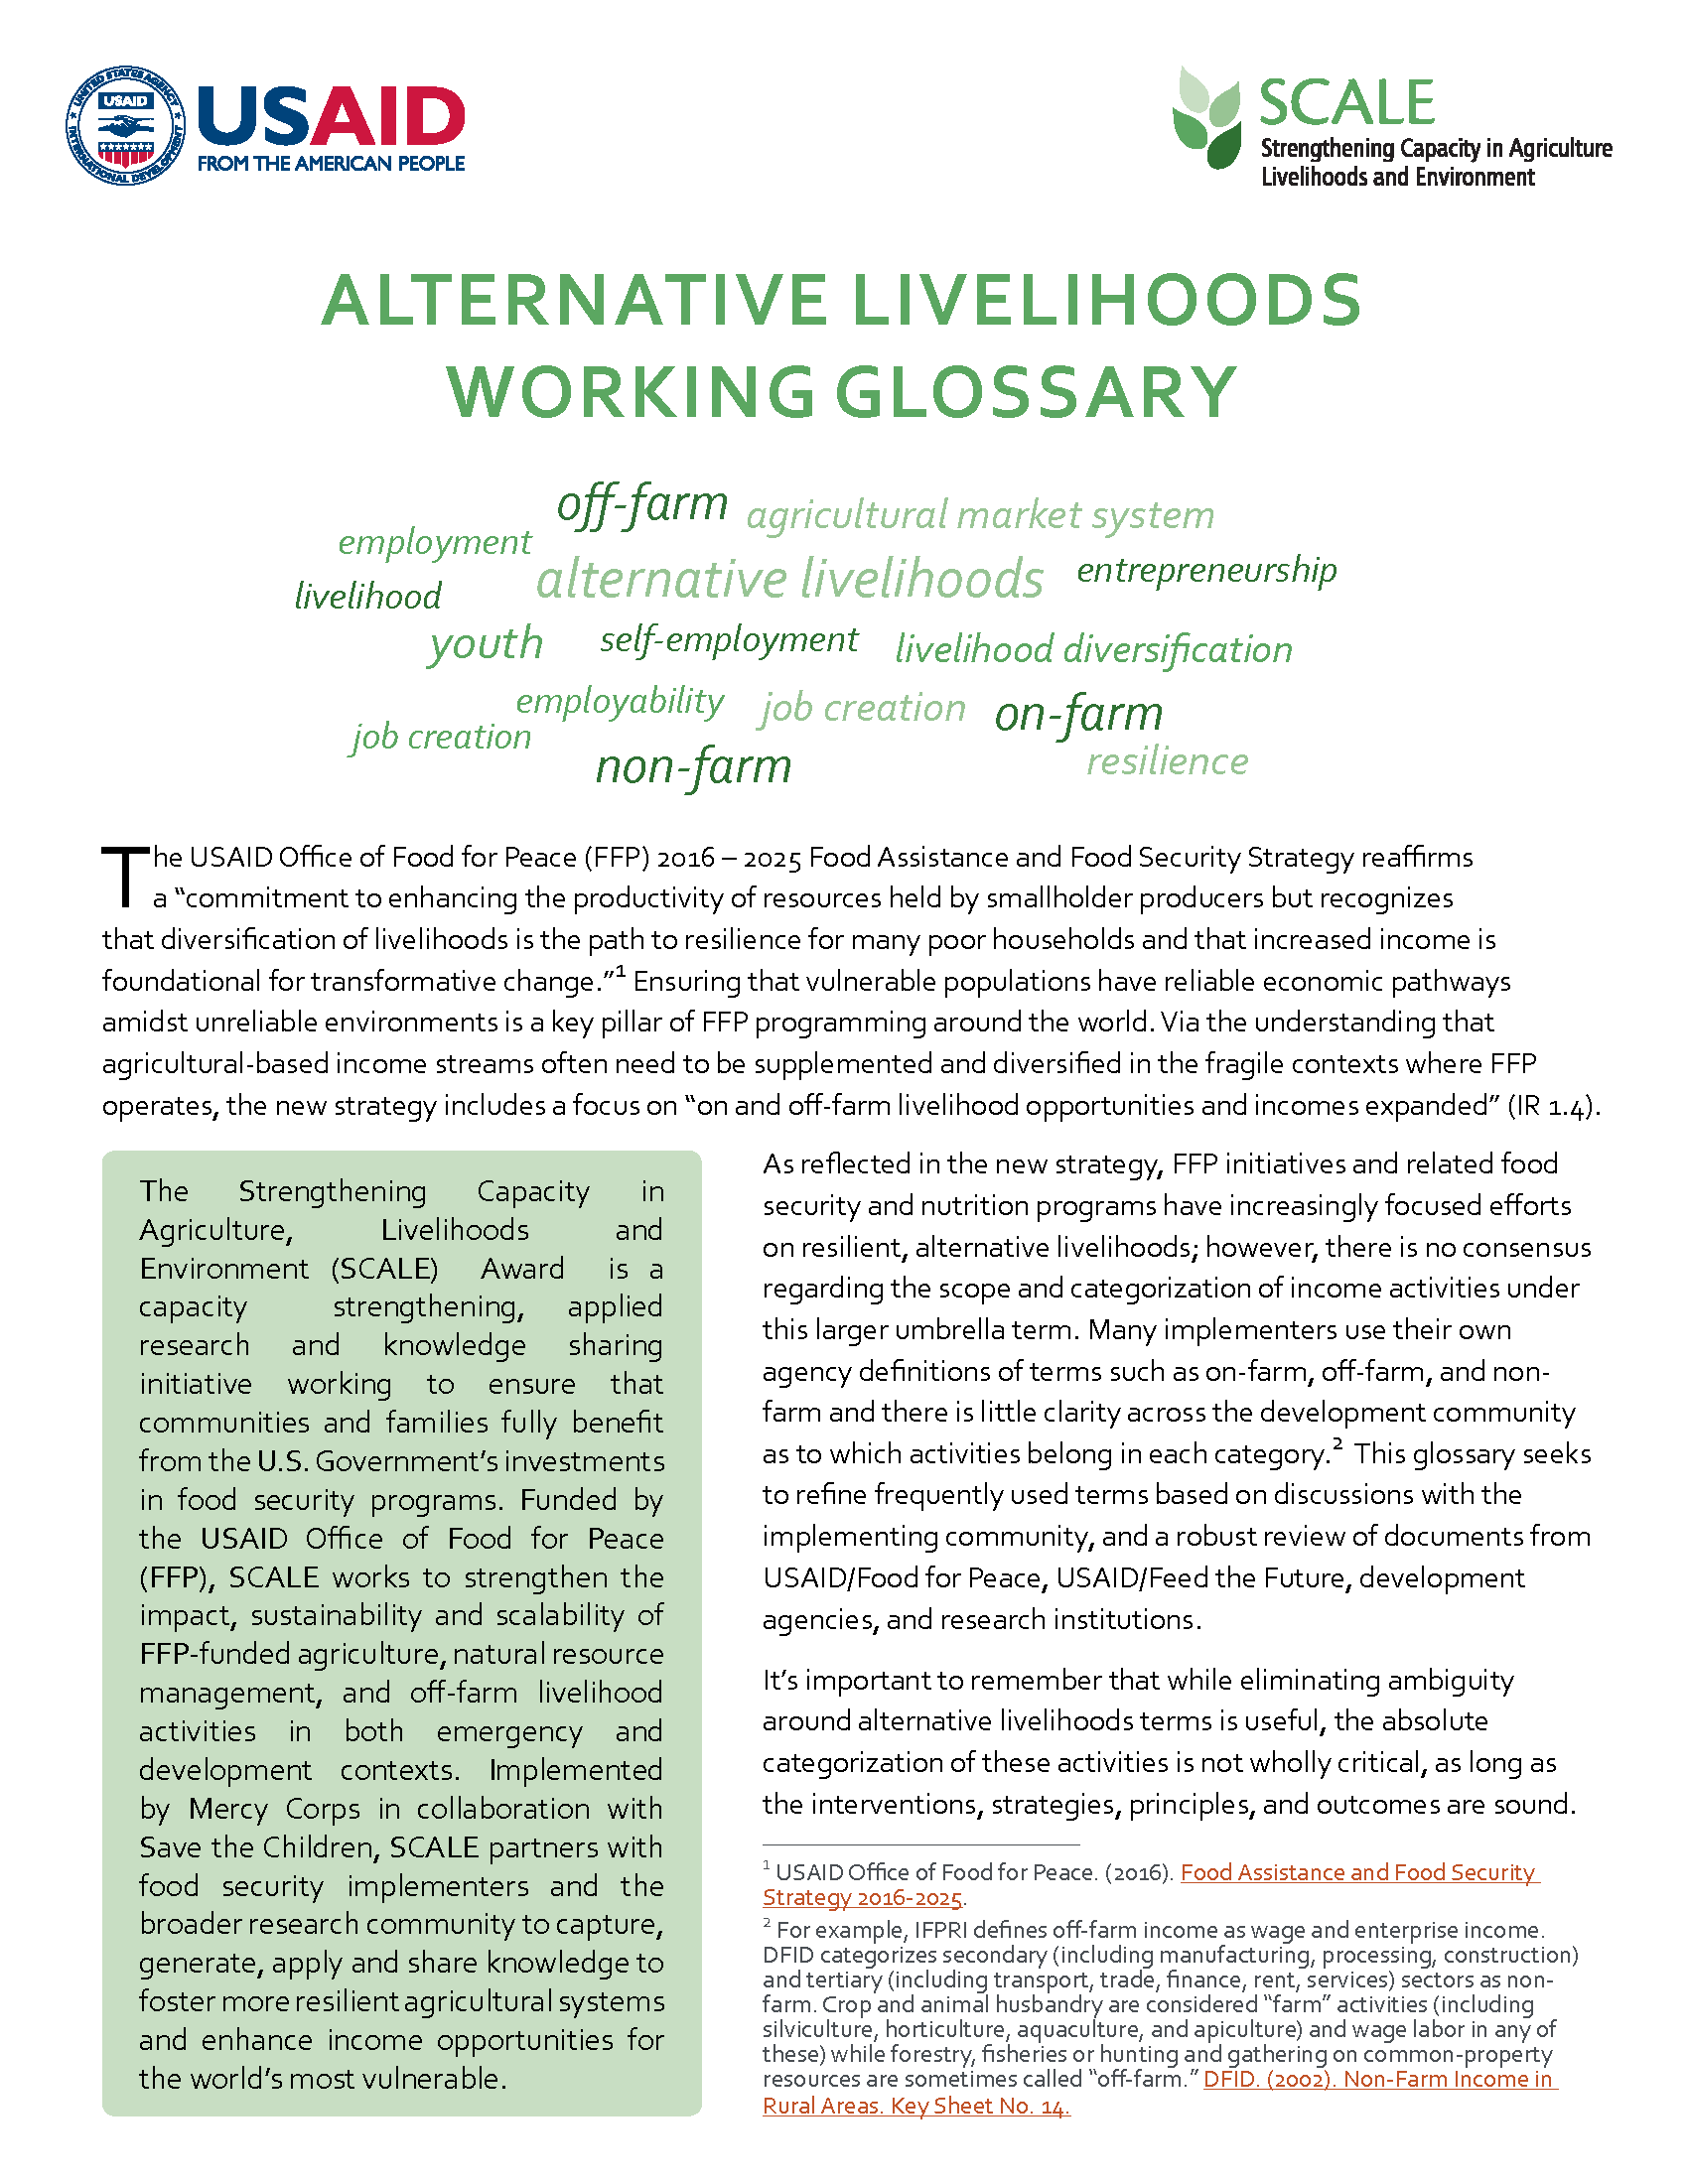 Front COver of SCALE Alternative Livelihoods Glossary